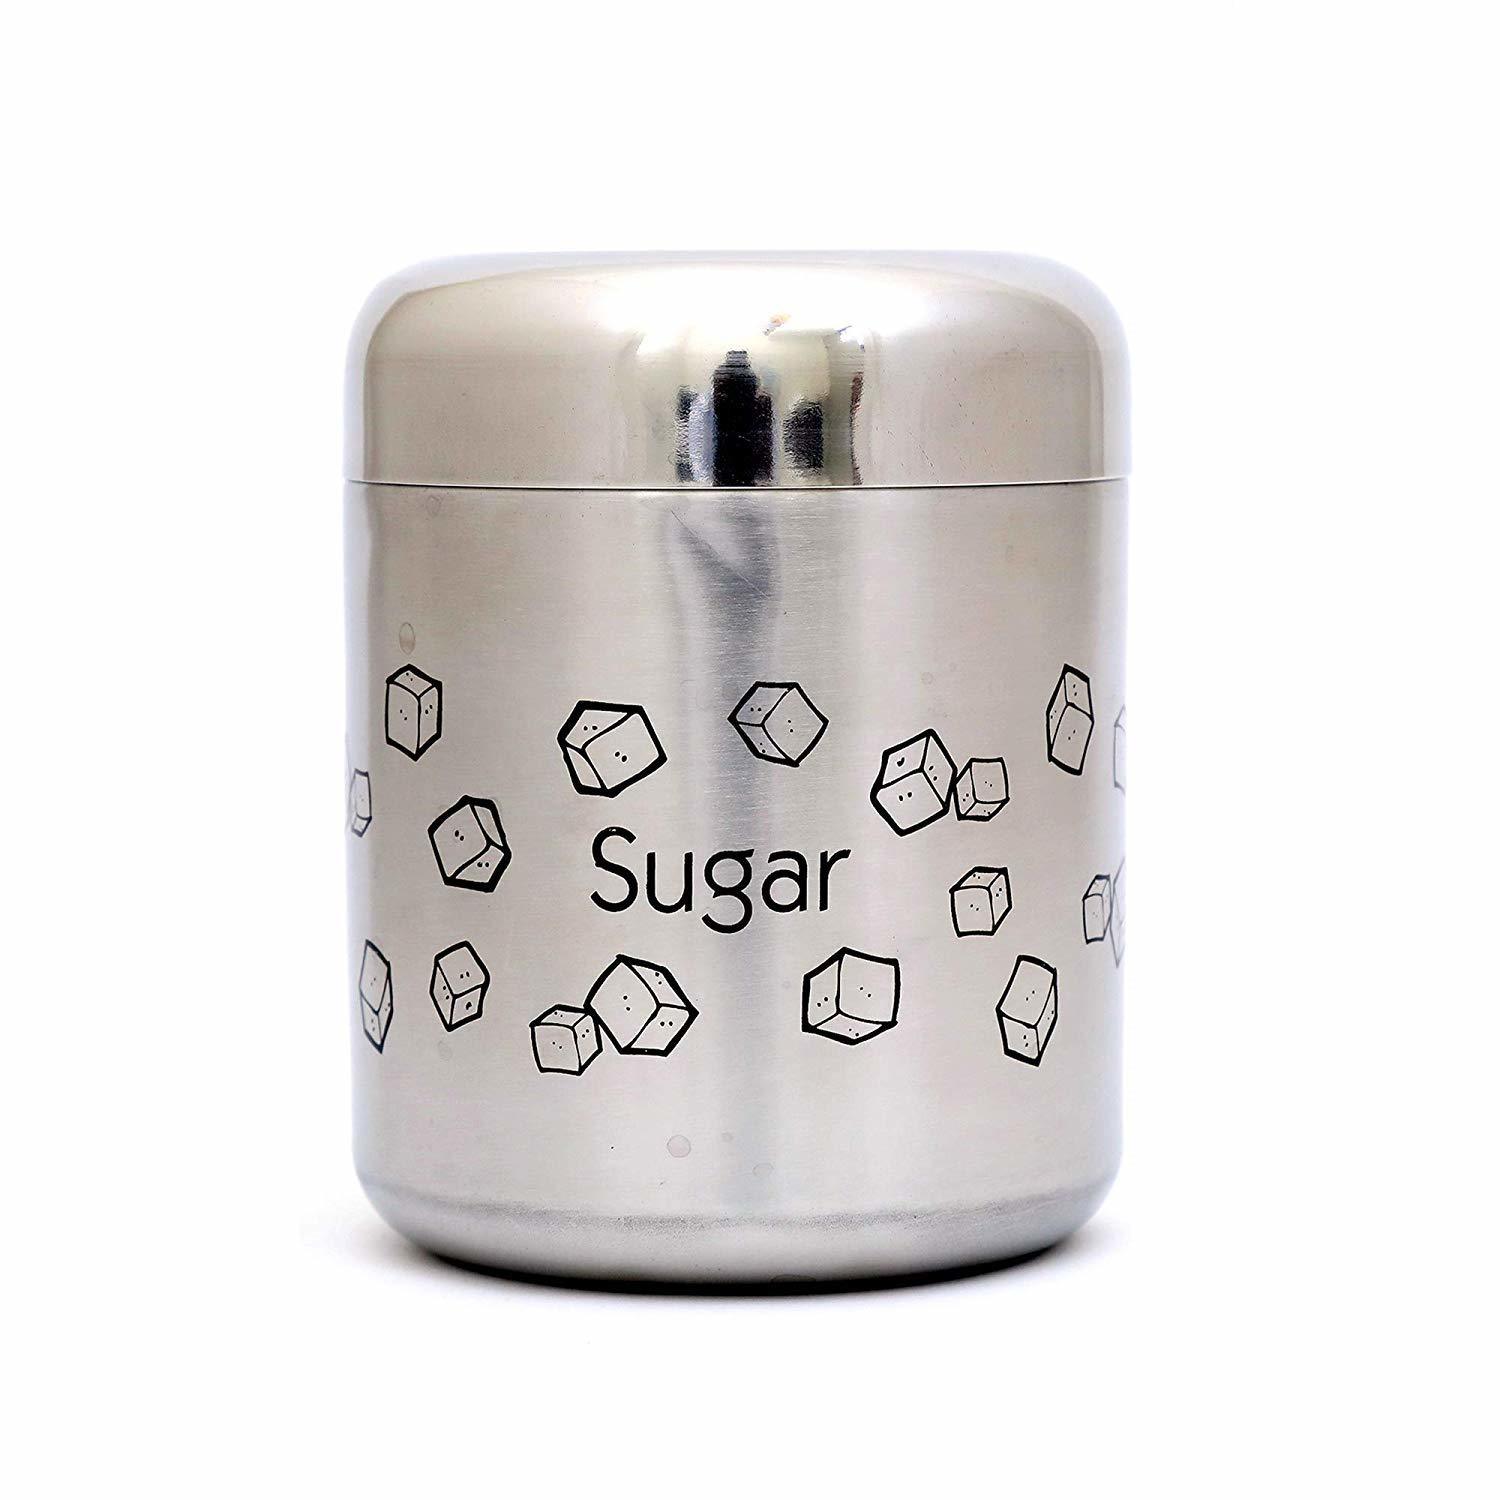 Stainless Steel Printed Canister Set